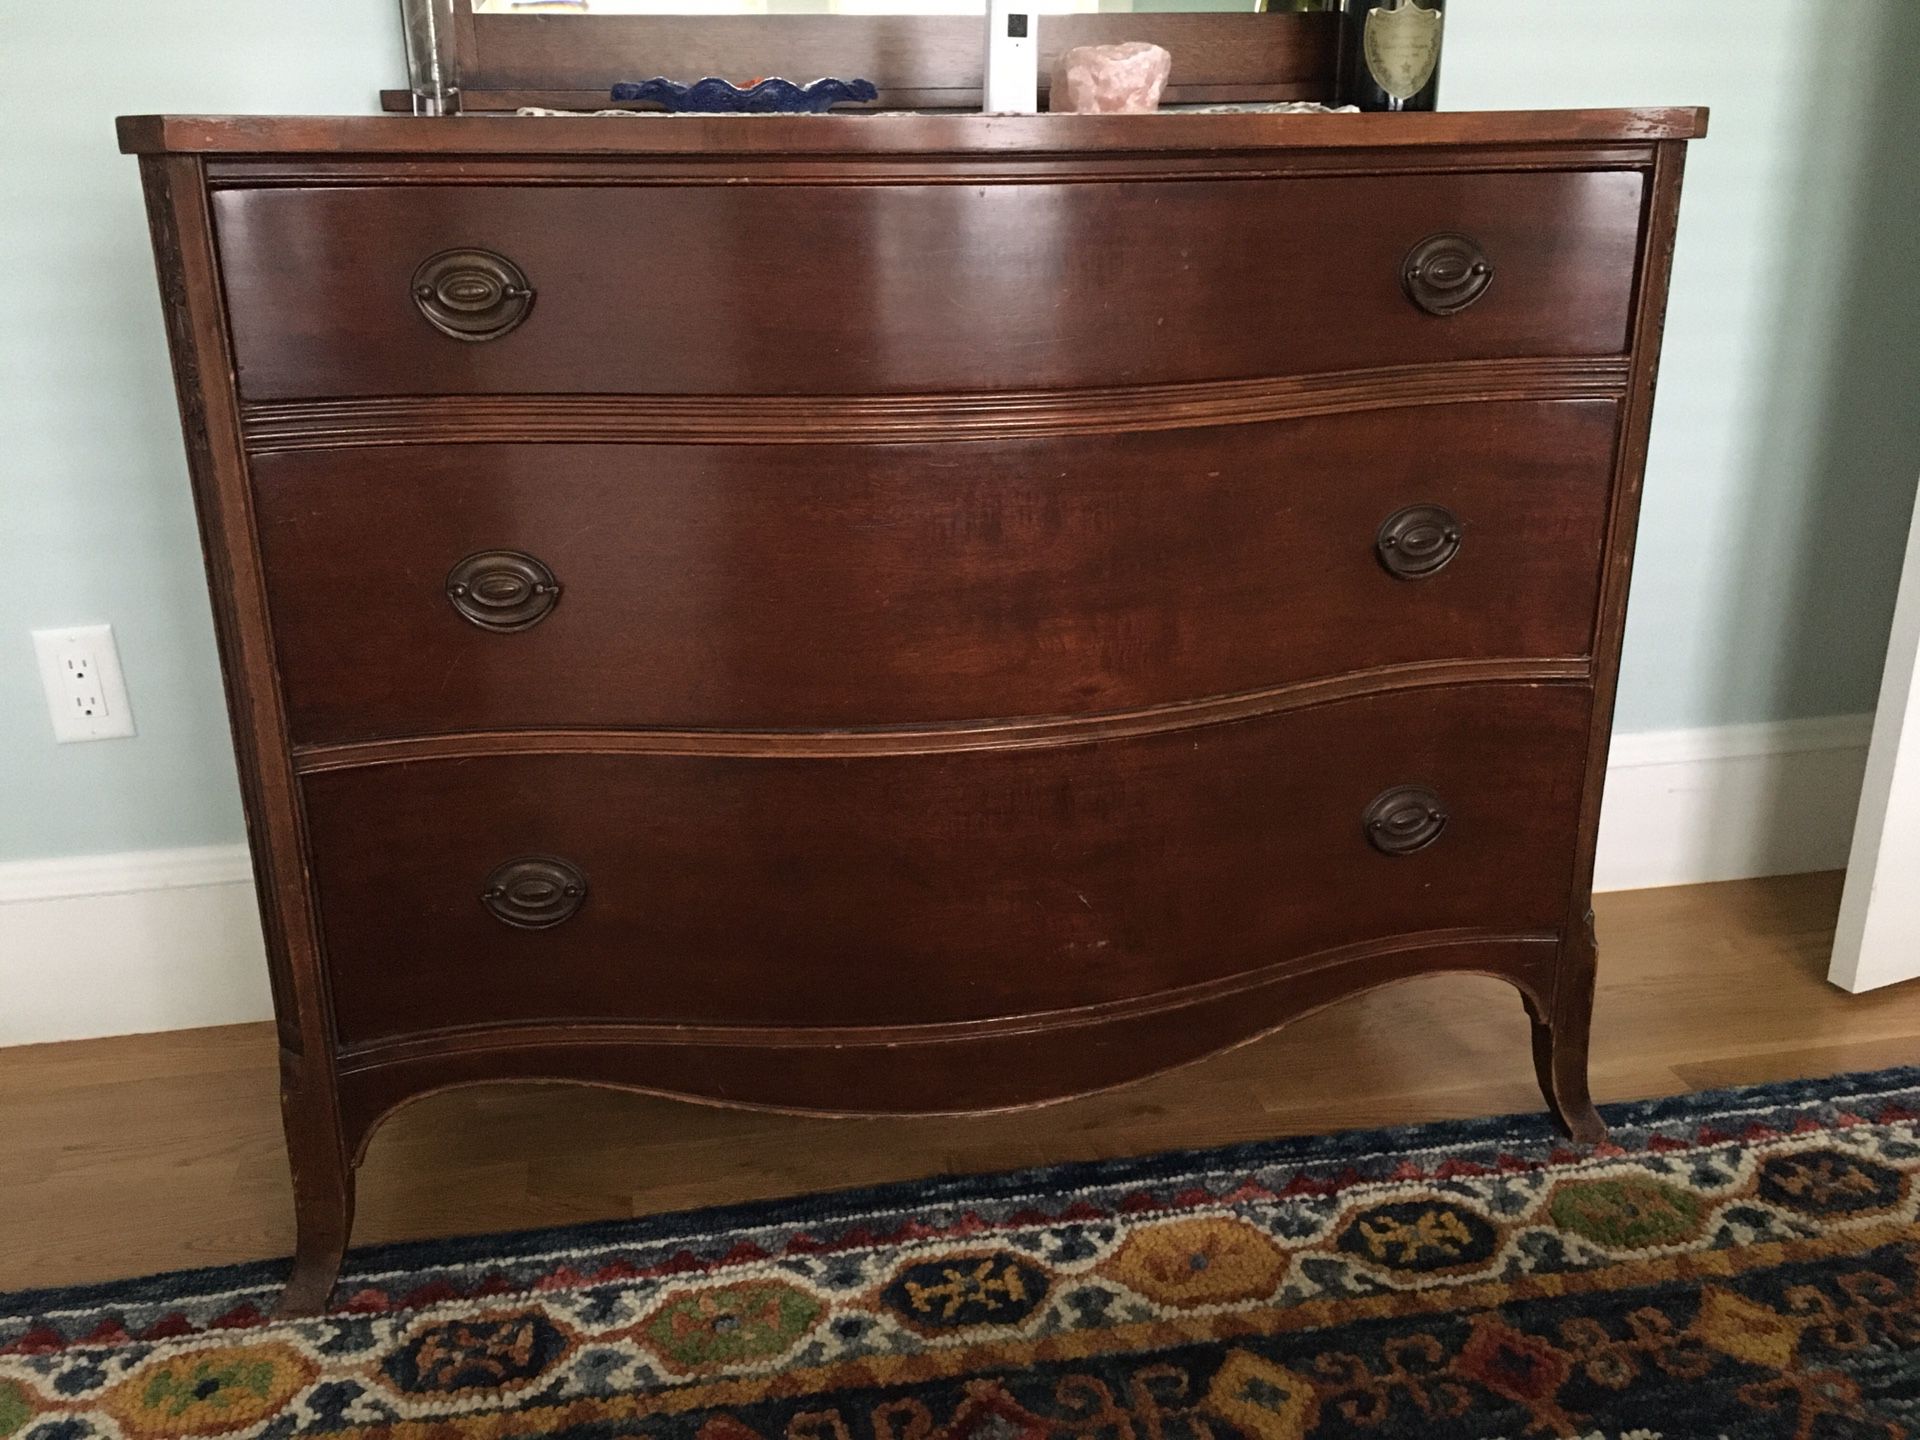 Beautiful antique dresser with dovetail drawers